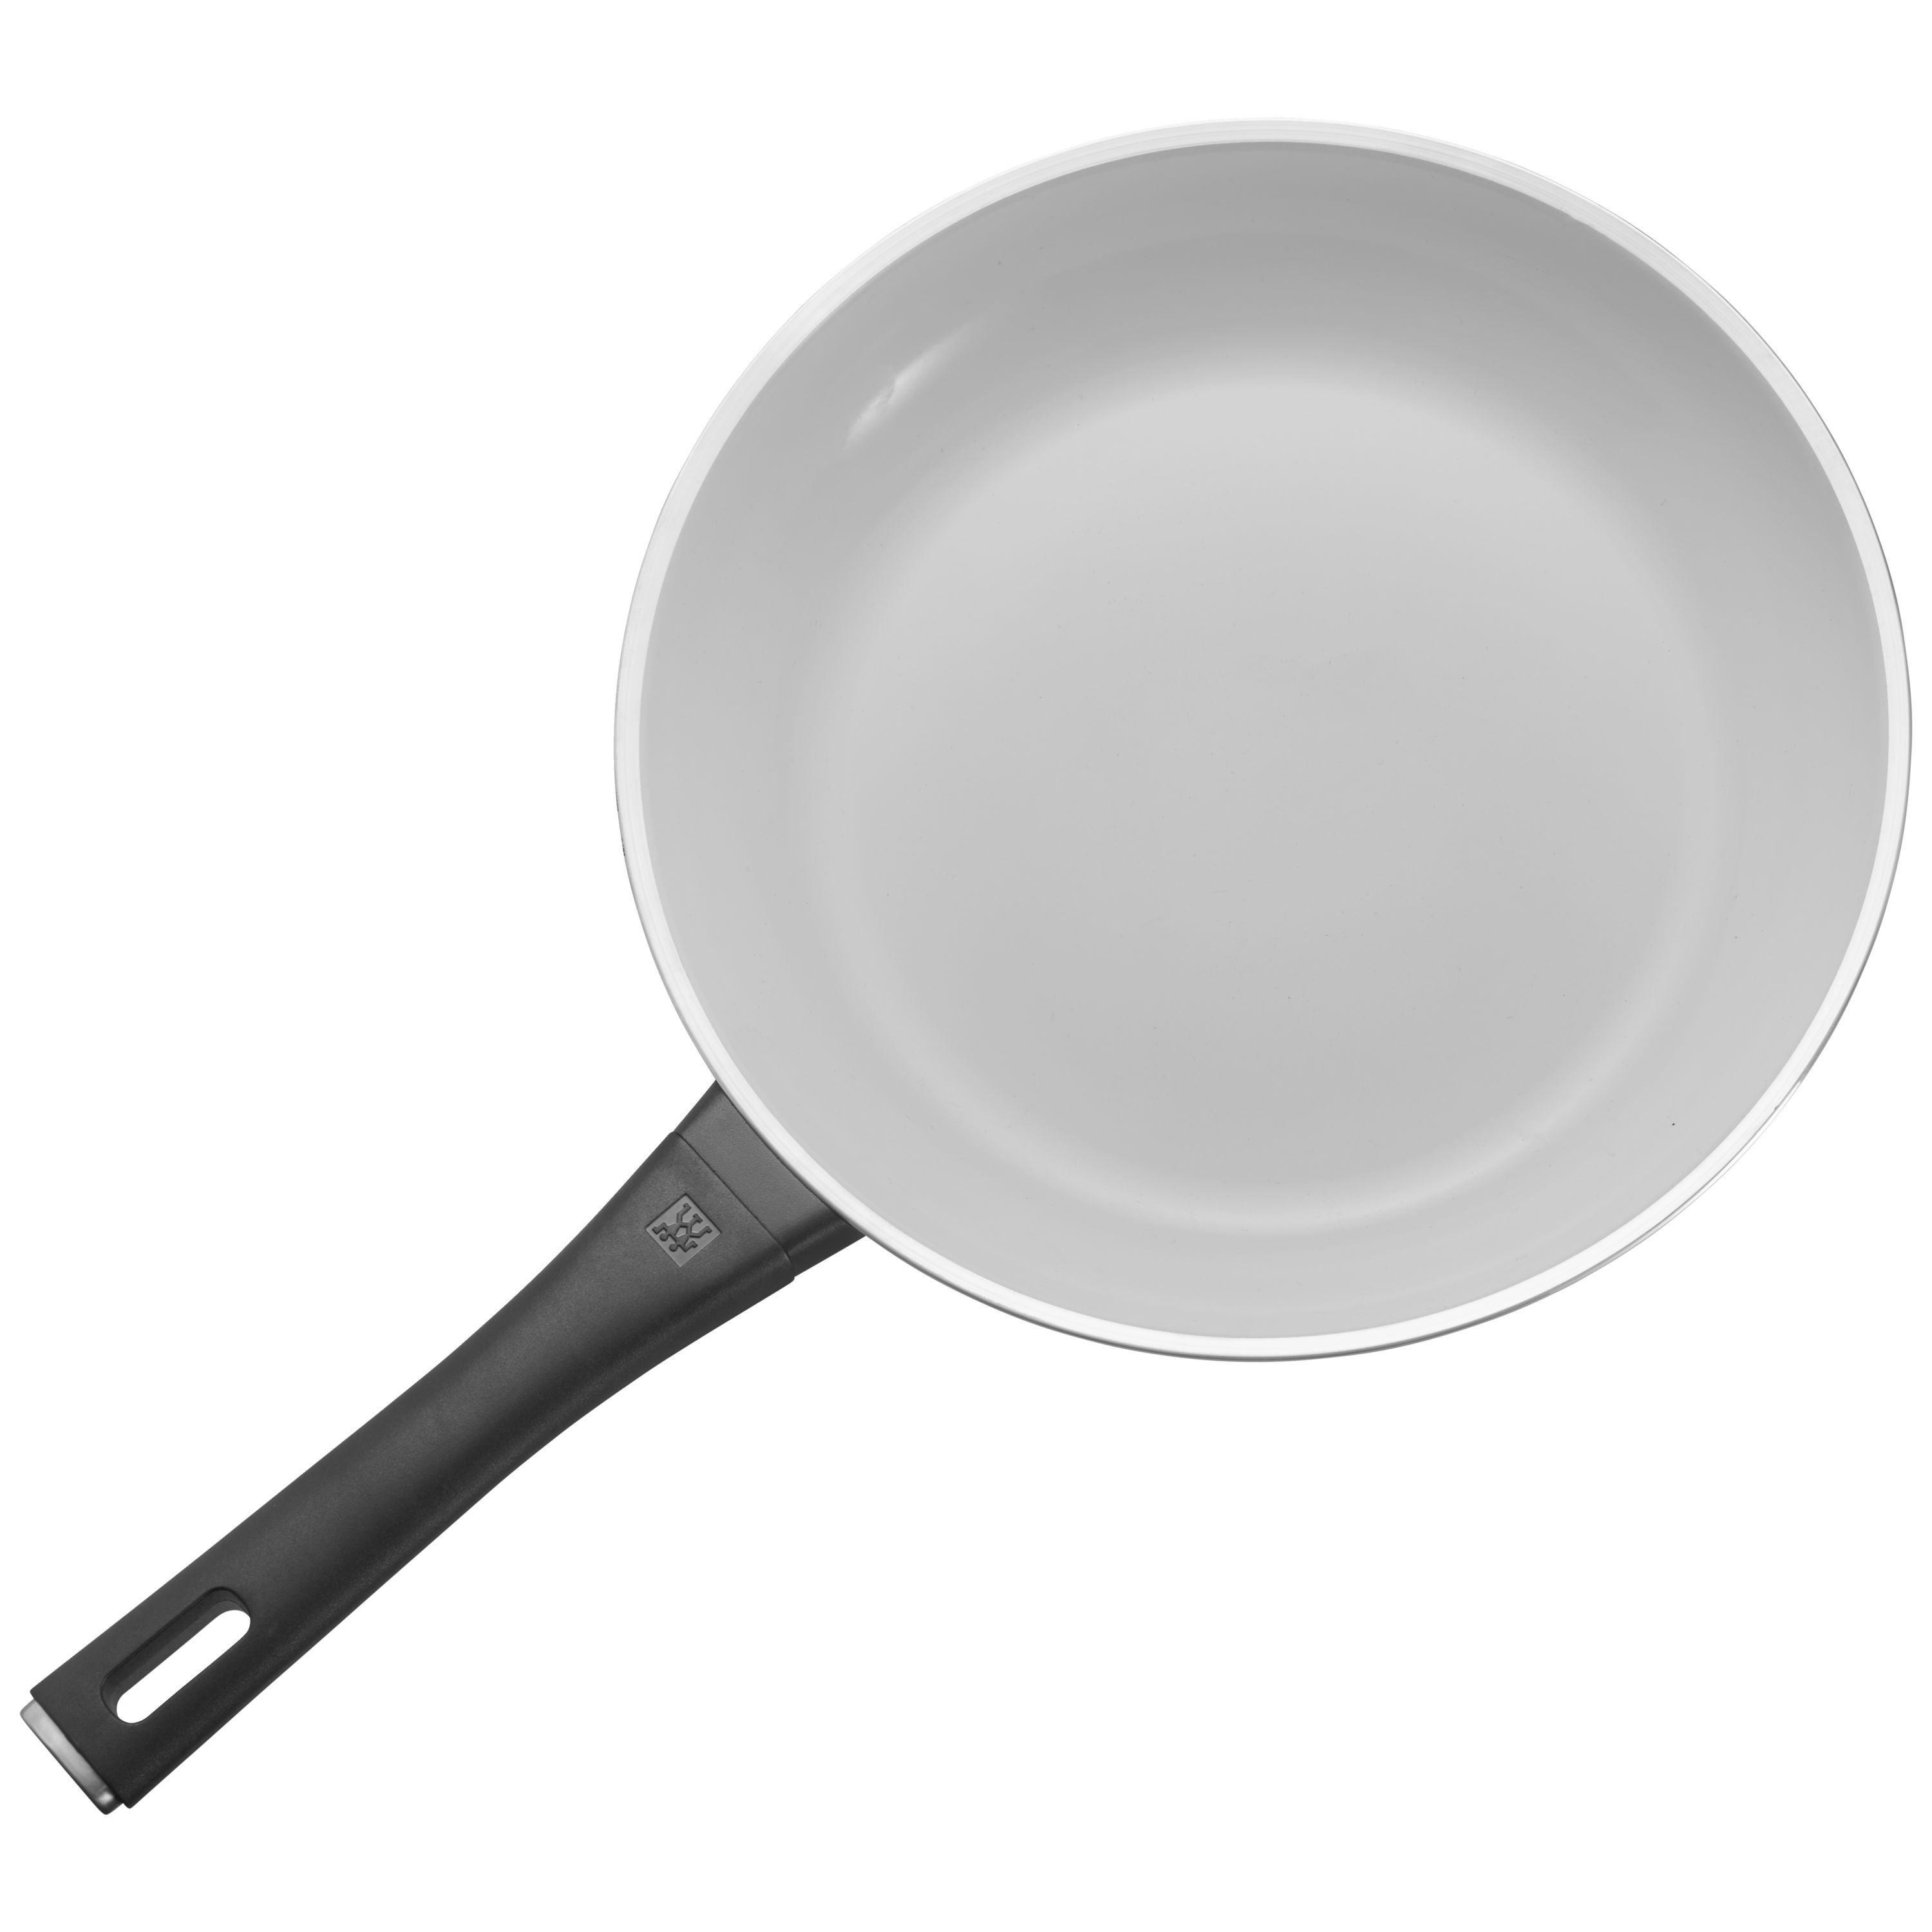 Zwilling Forte Plus Nonstick Fry Pan